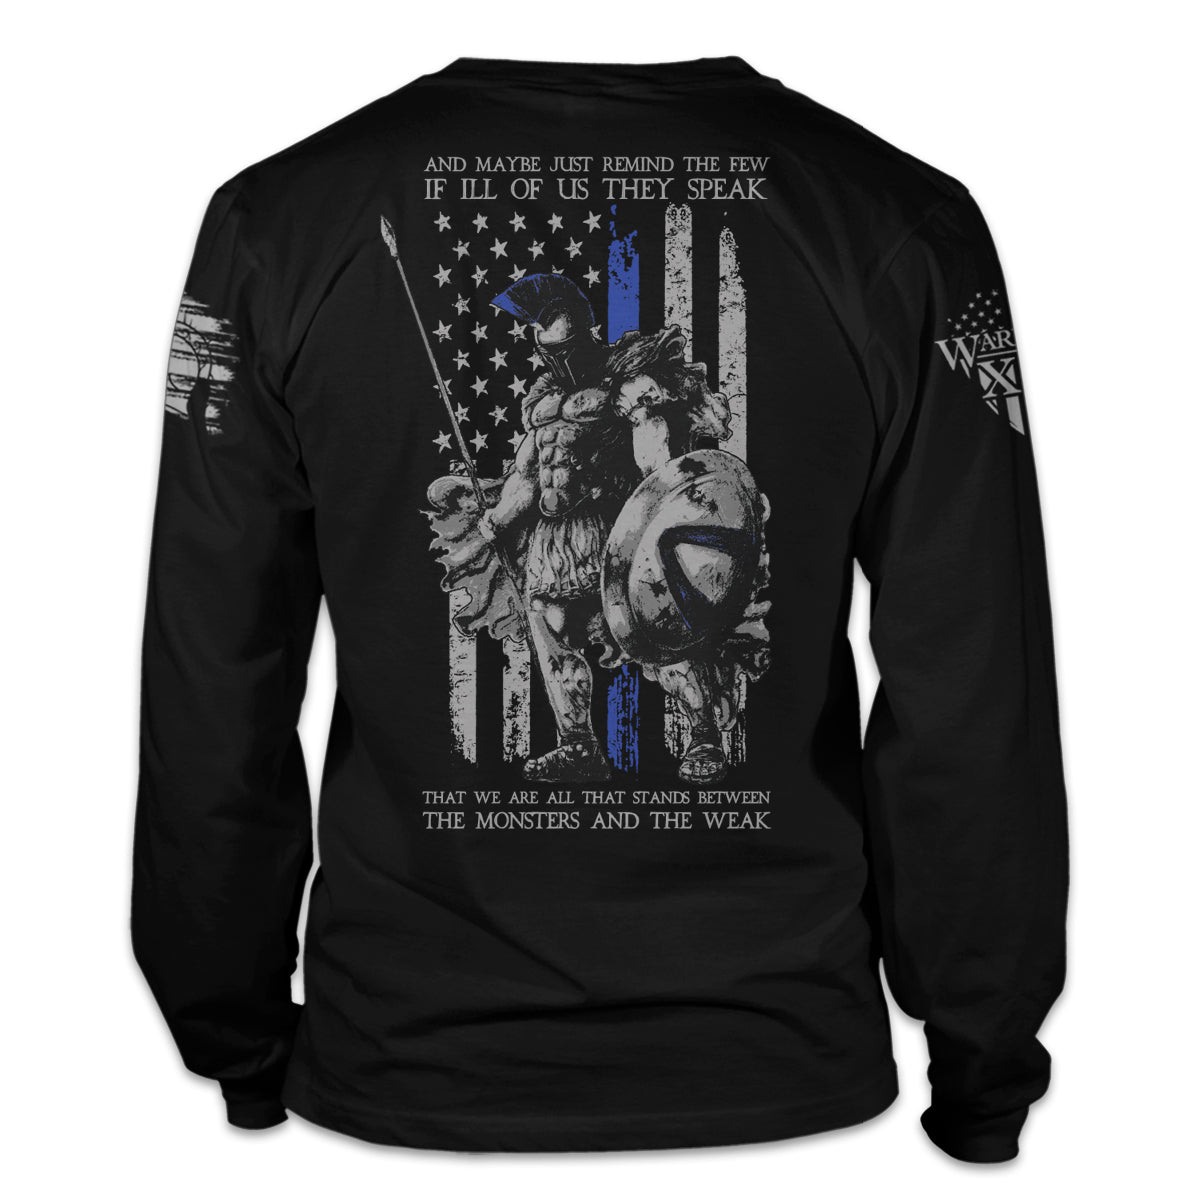 A black long sleeve shirt with "American Spartan" thin blue line printed on the back of the shirt.